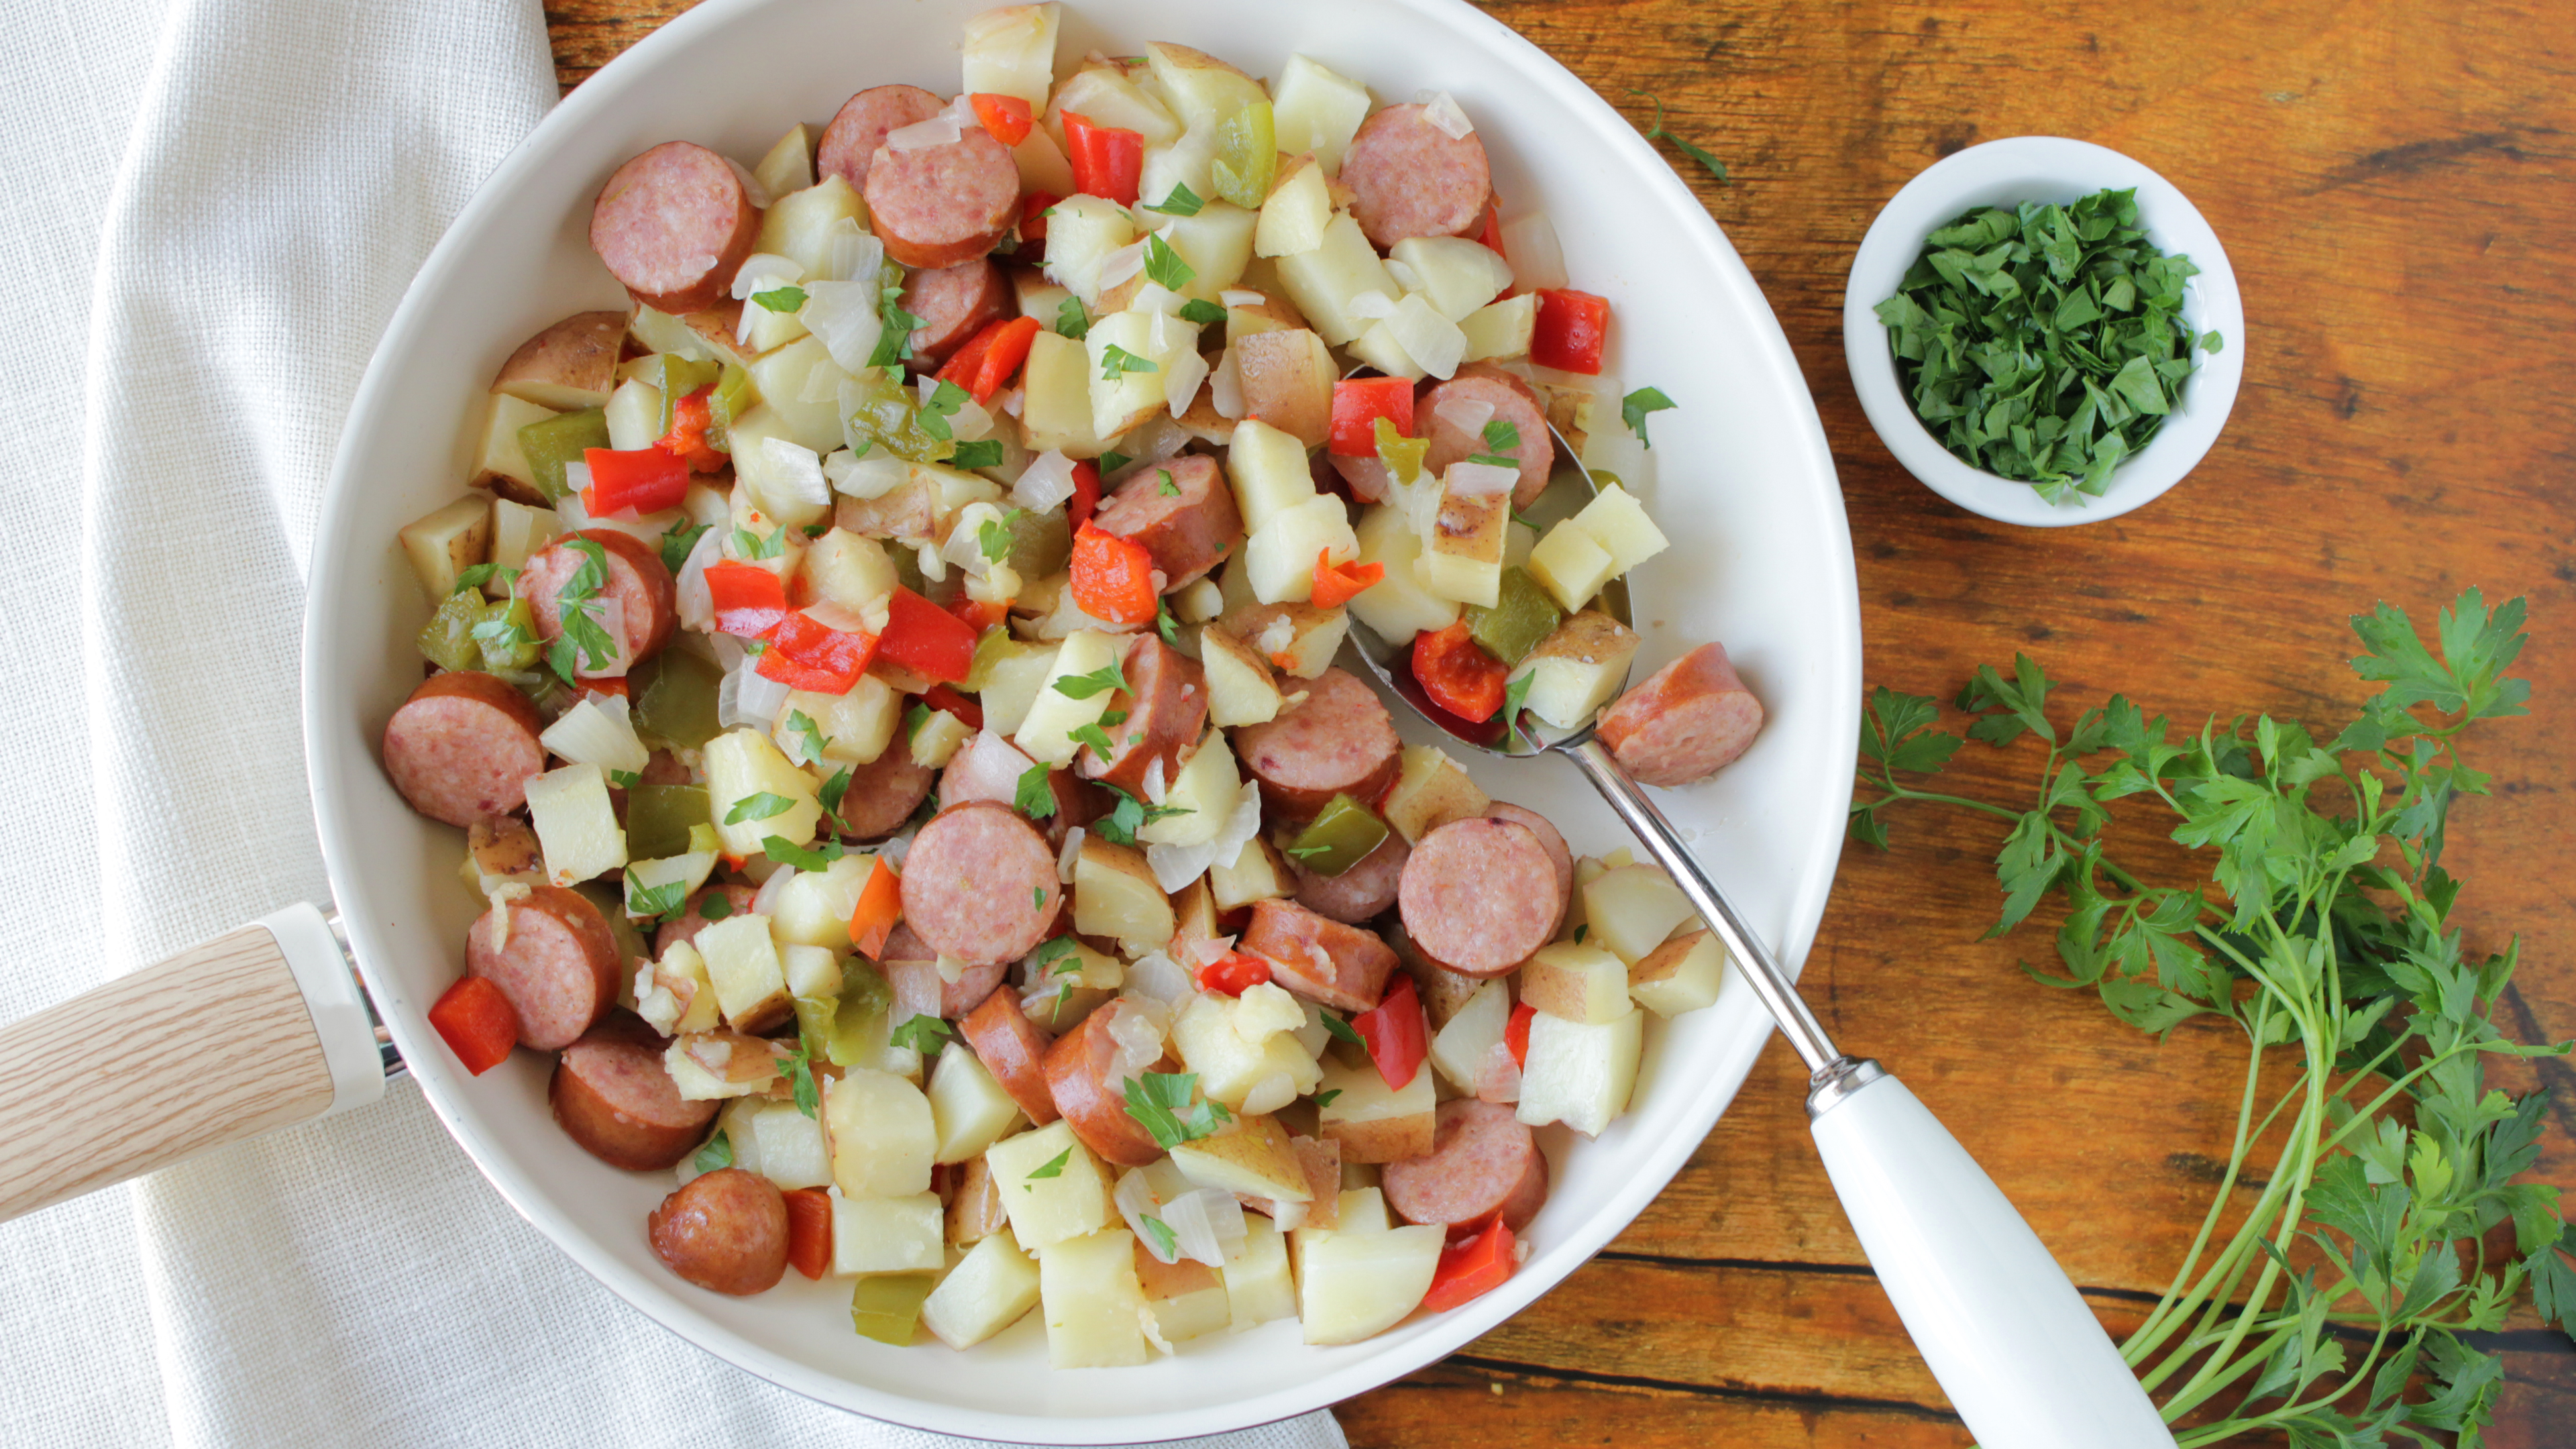 SMOKED SAUSAGE, TATERS, PEPPERS AND ONIONS COUNTRY STYLE